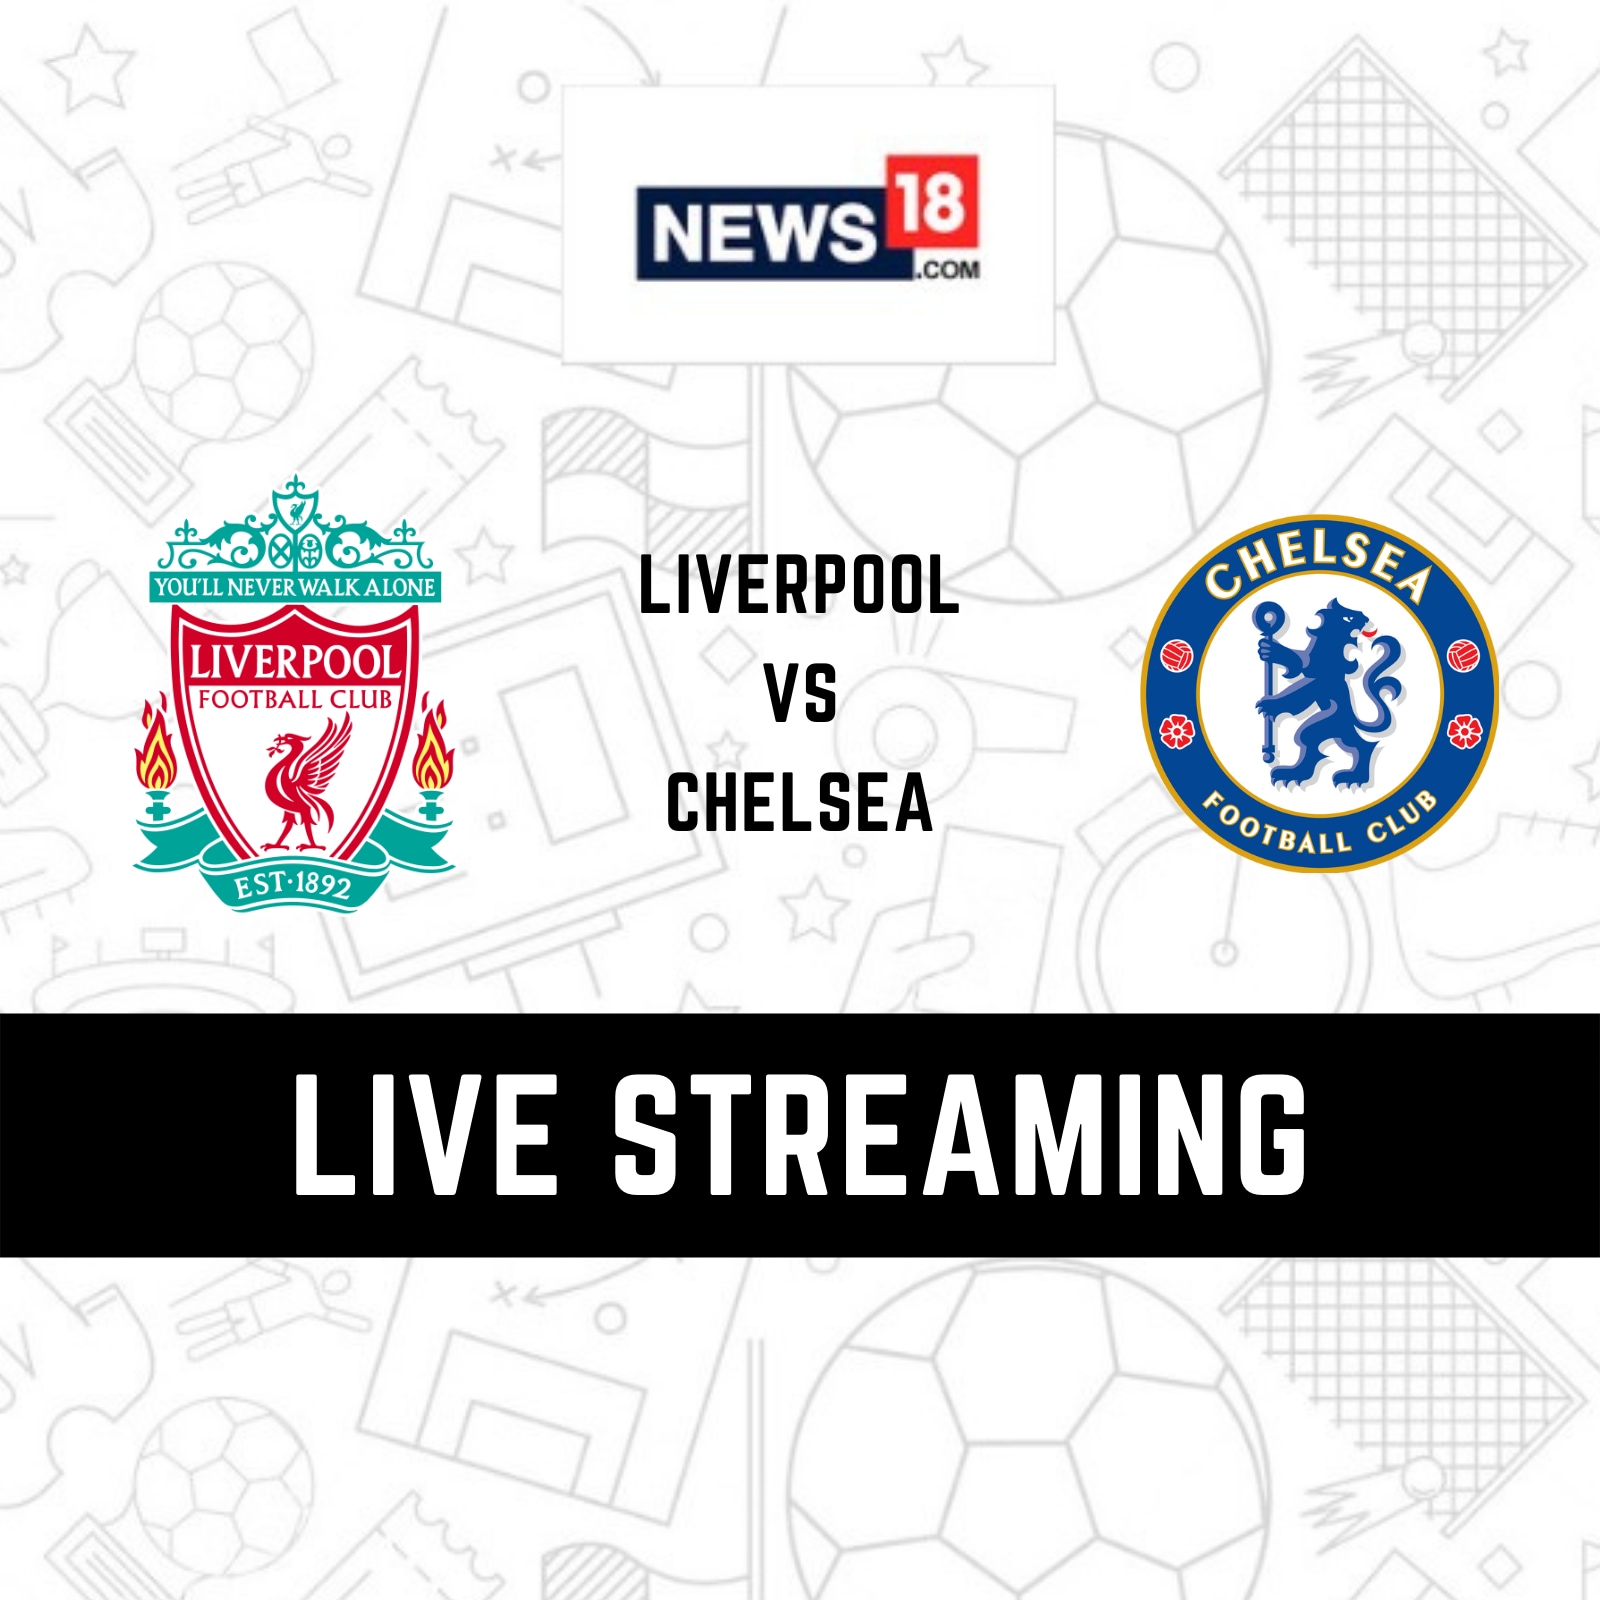 Liverpool vs Chelsea Premier League Live Streaming When and Where to Watch Liverpool vs Chelsea